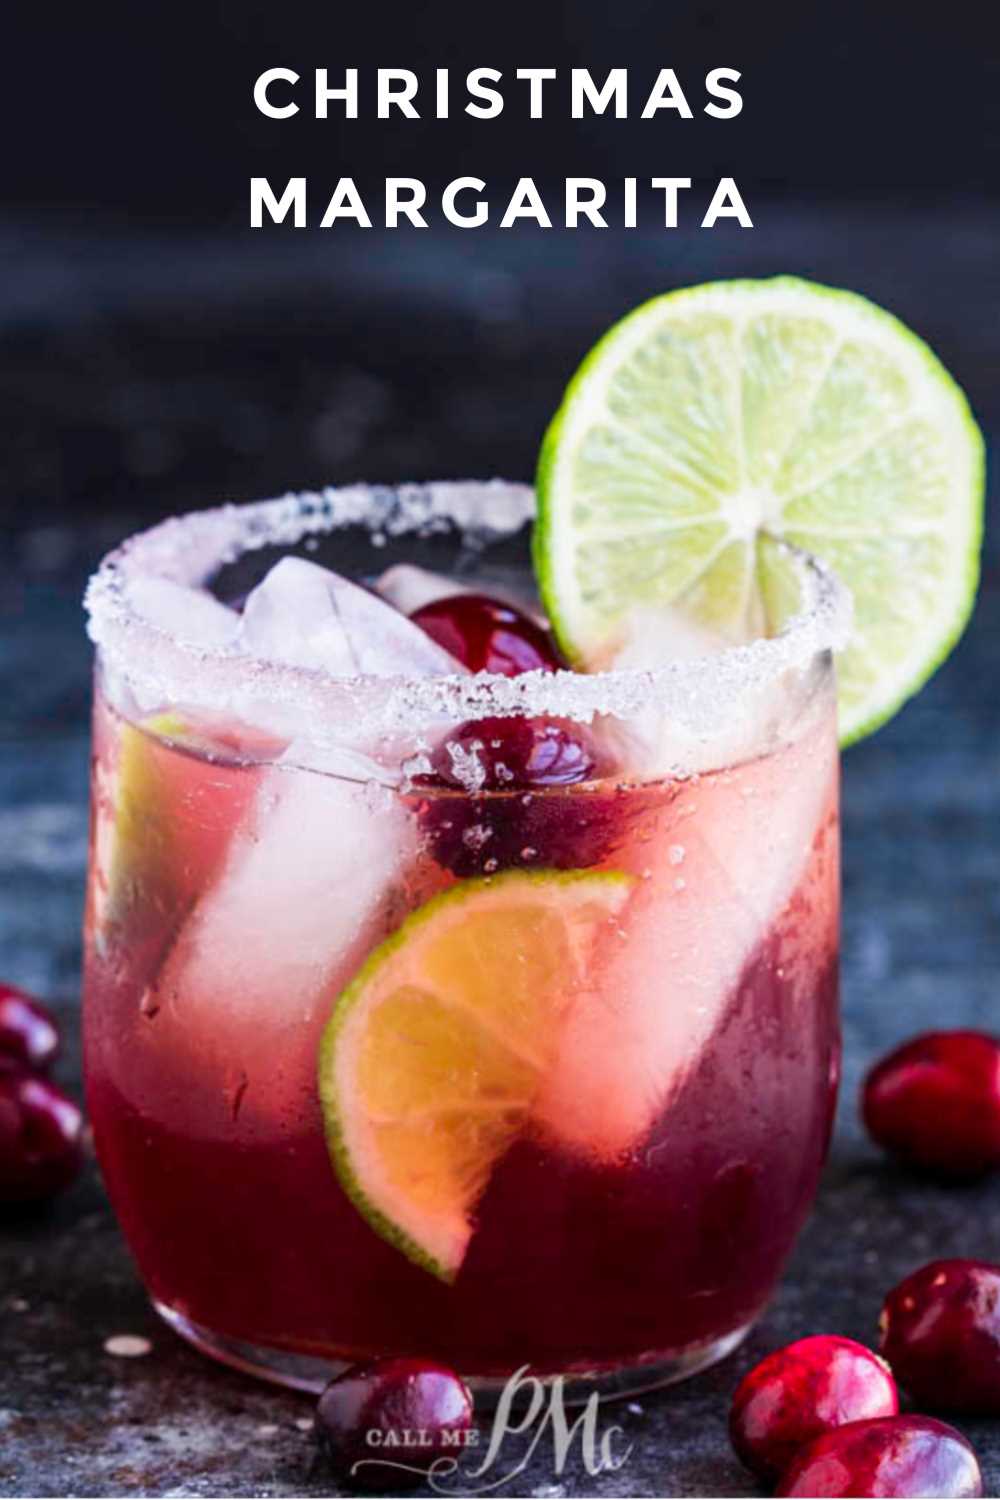 Festive Christmas Margarita Recipe is easy to make, tastes delicious, and the perfect holiday cocktail. #cocktail #recipe #drink #margarita #Christmas #tequila #cranberry